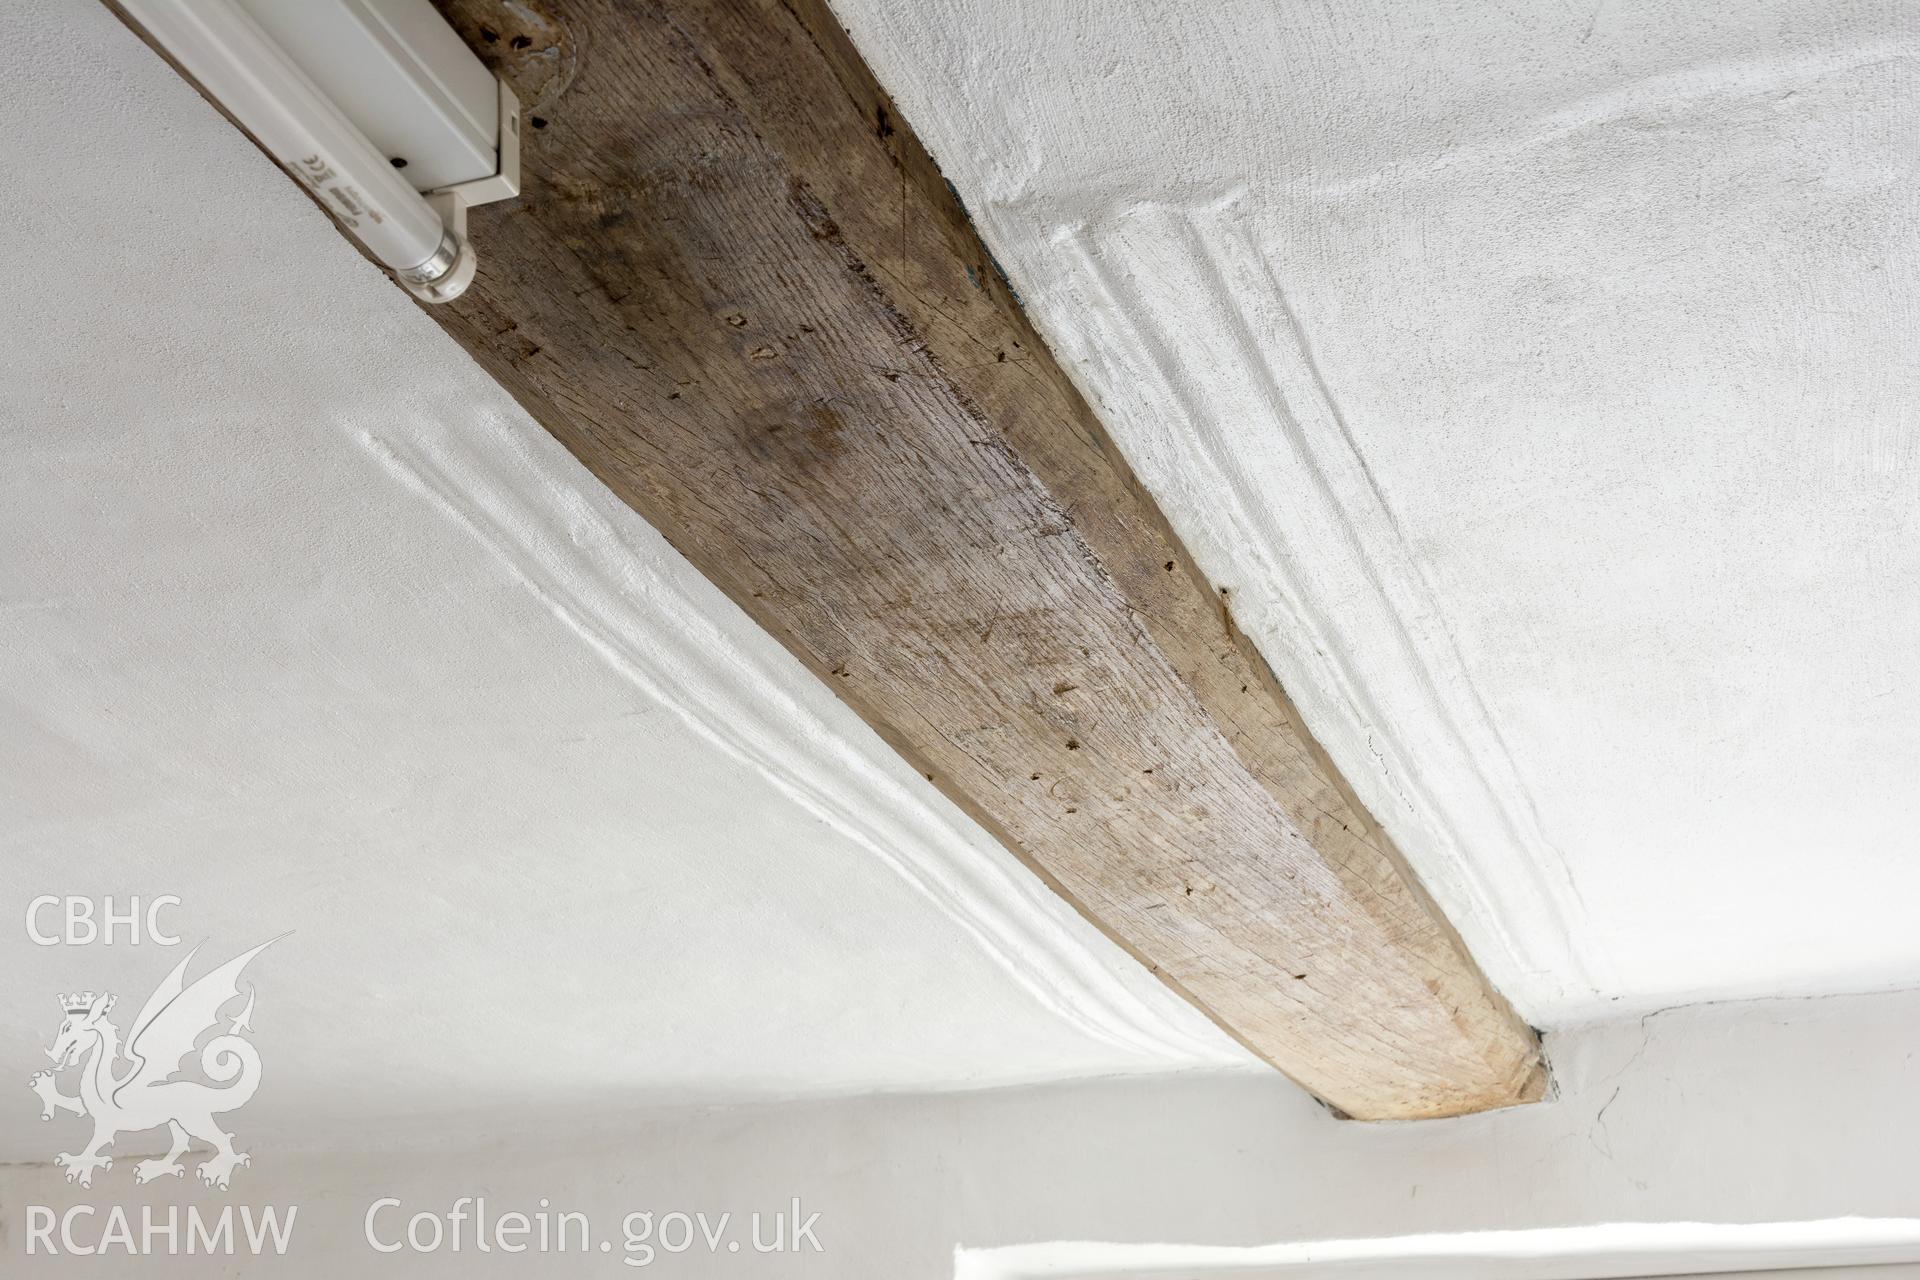 Interior view of chapel  wing: first-floor  ogee-stopped beam and ceiling moulding, taken by Martin Crampin for RCAHMW 21st March 2017.